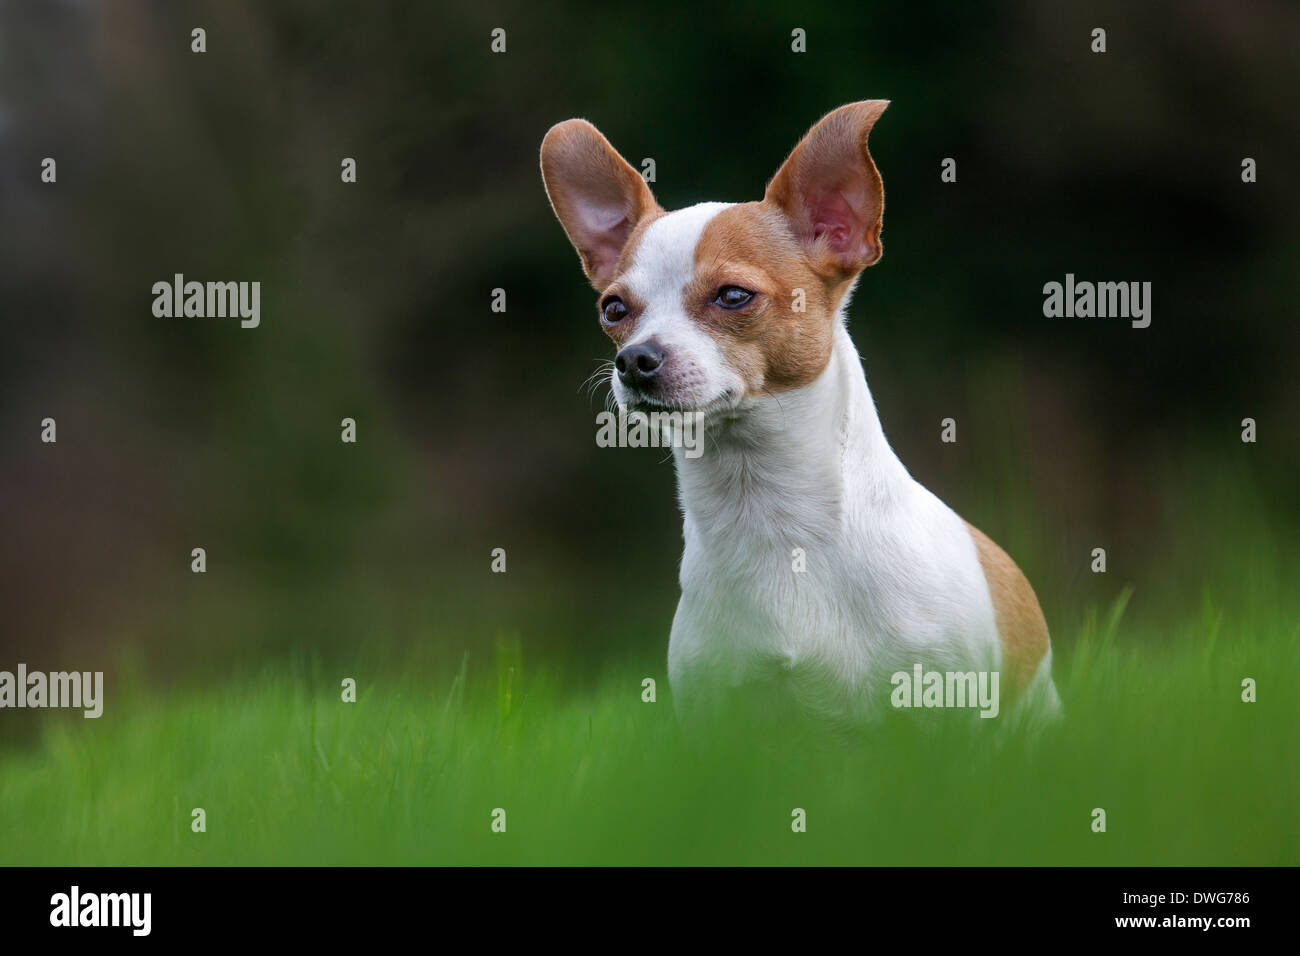 Short-haired Chihuahua in garden Stock Photo